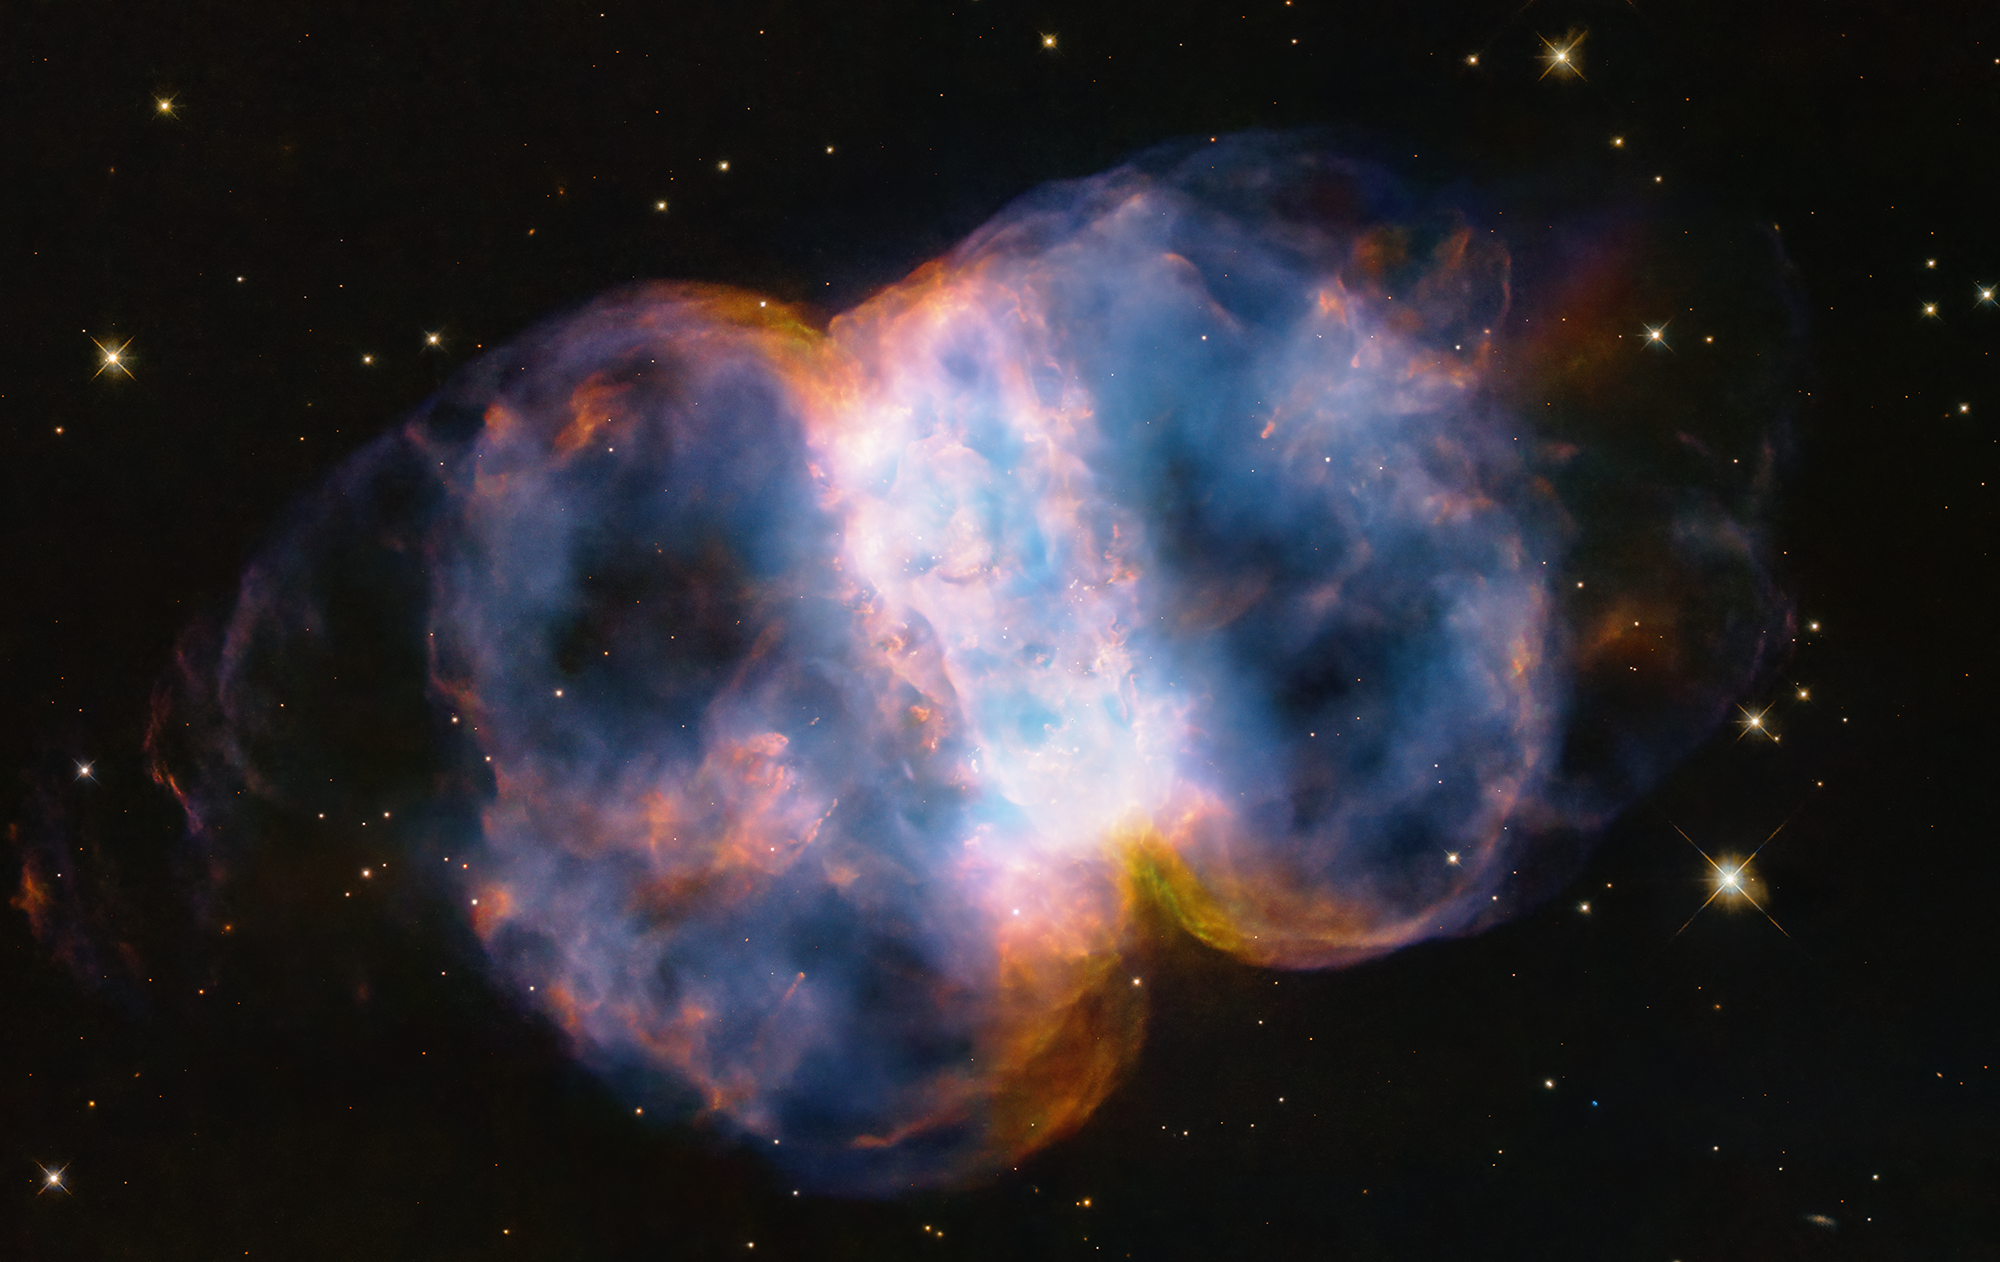 Hubble Celebrates 34th Anniversary with a Look at the Little Dumbbell Nebula